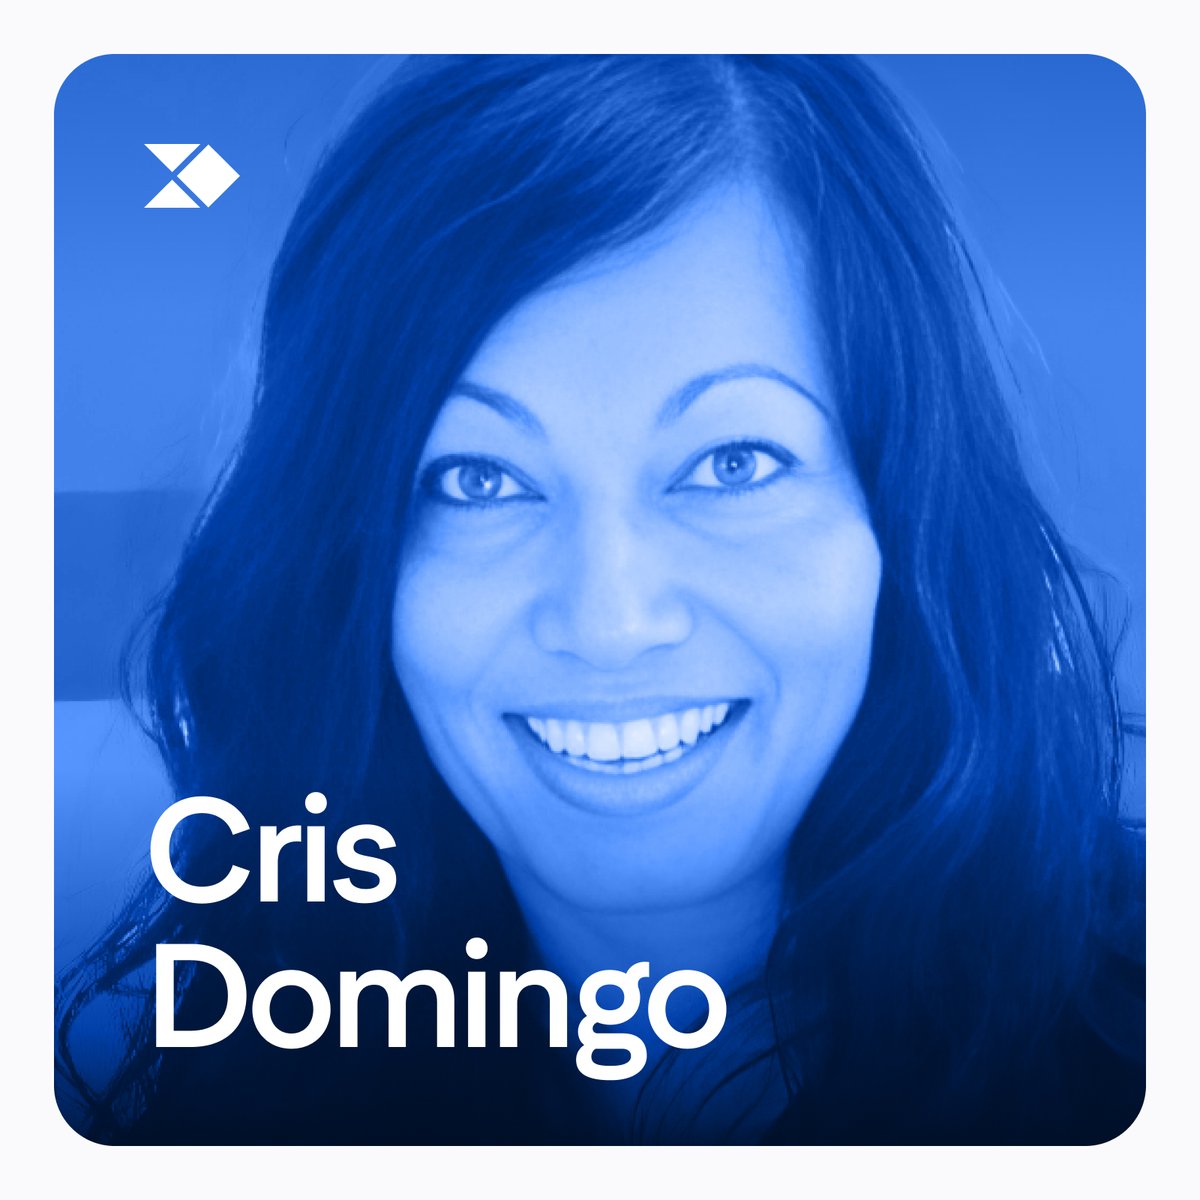 In our latest #PeopleofProductboard podcast, Cris Domingo, Head of People, Culture, and Talent, shares insights on finding the right company culture and job fit. Listen now: bit.ly/4dhewgx #CareerTips #CareerGrowth #ProductManagement